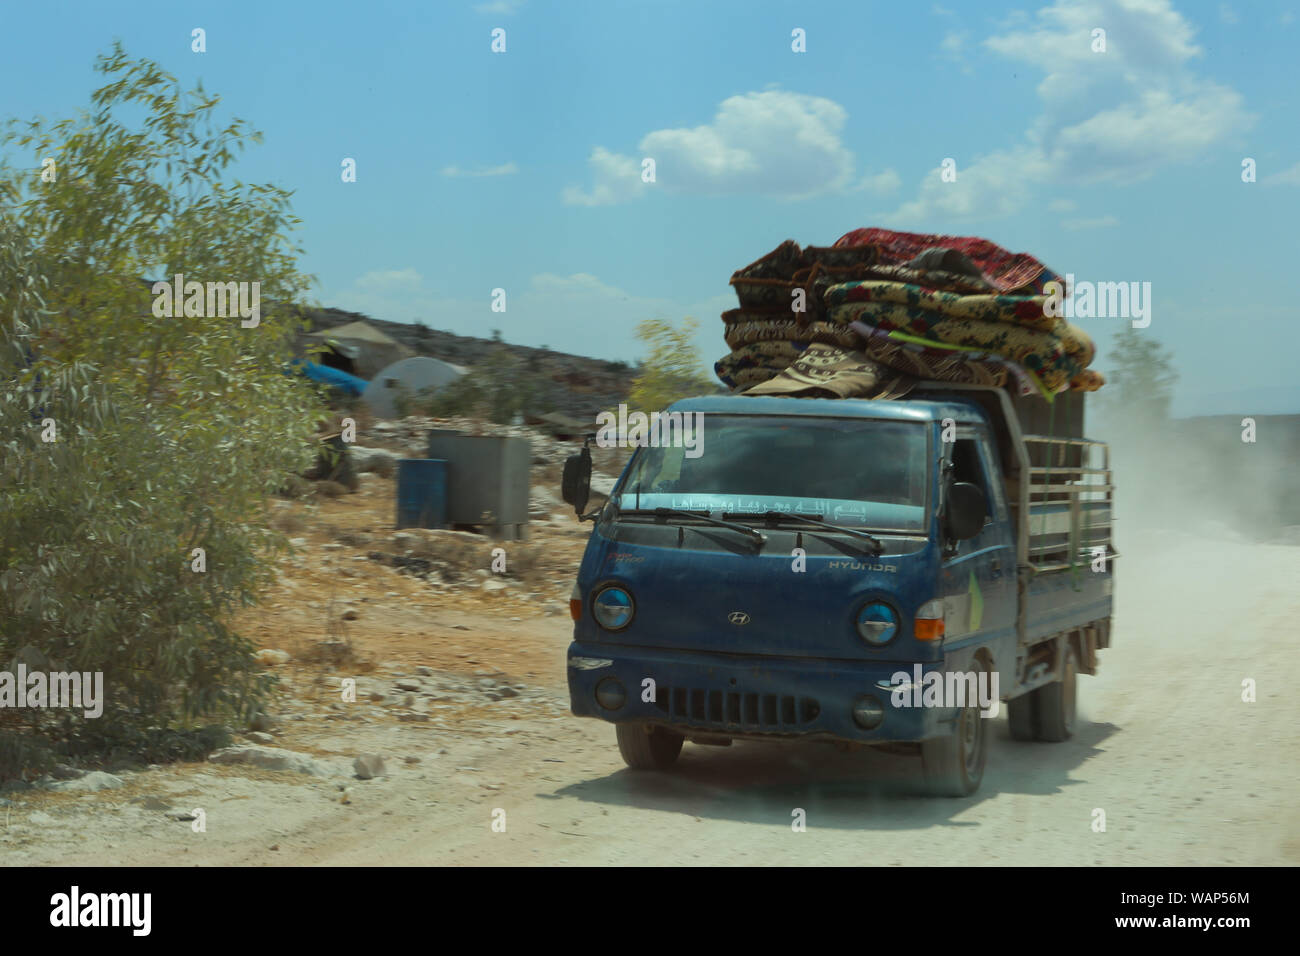 August 21, 2019: Cars and trucks carry the furniture of displaced Syrians heading to the Turkish border following the current government offensive. In recent weeks the Syrian government has stepped up a military campaign against rebel-held bastions in the Idlib and Hama provinces in north-western Syria following the cessation of a truce. The campaign has sparked further internal displacement, especially recently from the Khan Sheikhoun and the nearby villages of Morek, and Latamneh, as the government recently seized them from the opposition. It is estimated that hundreds of thousands of people Stock Photo